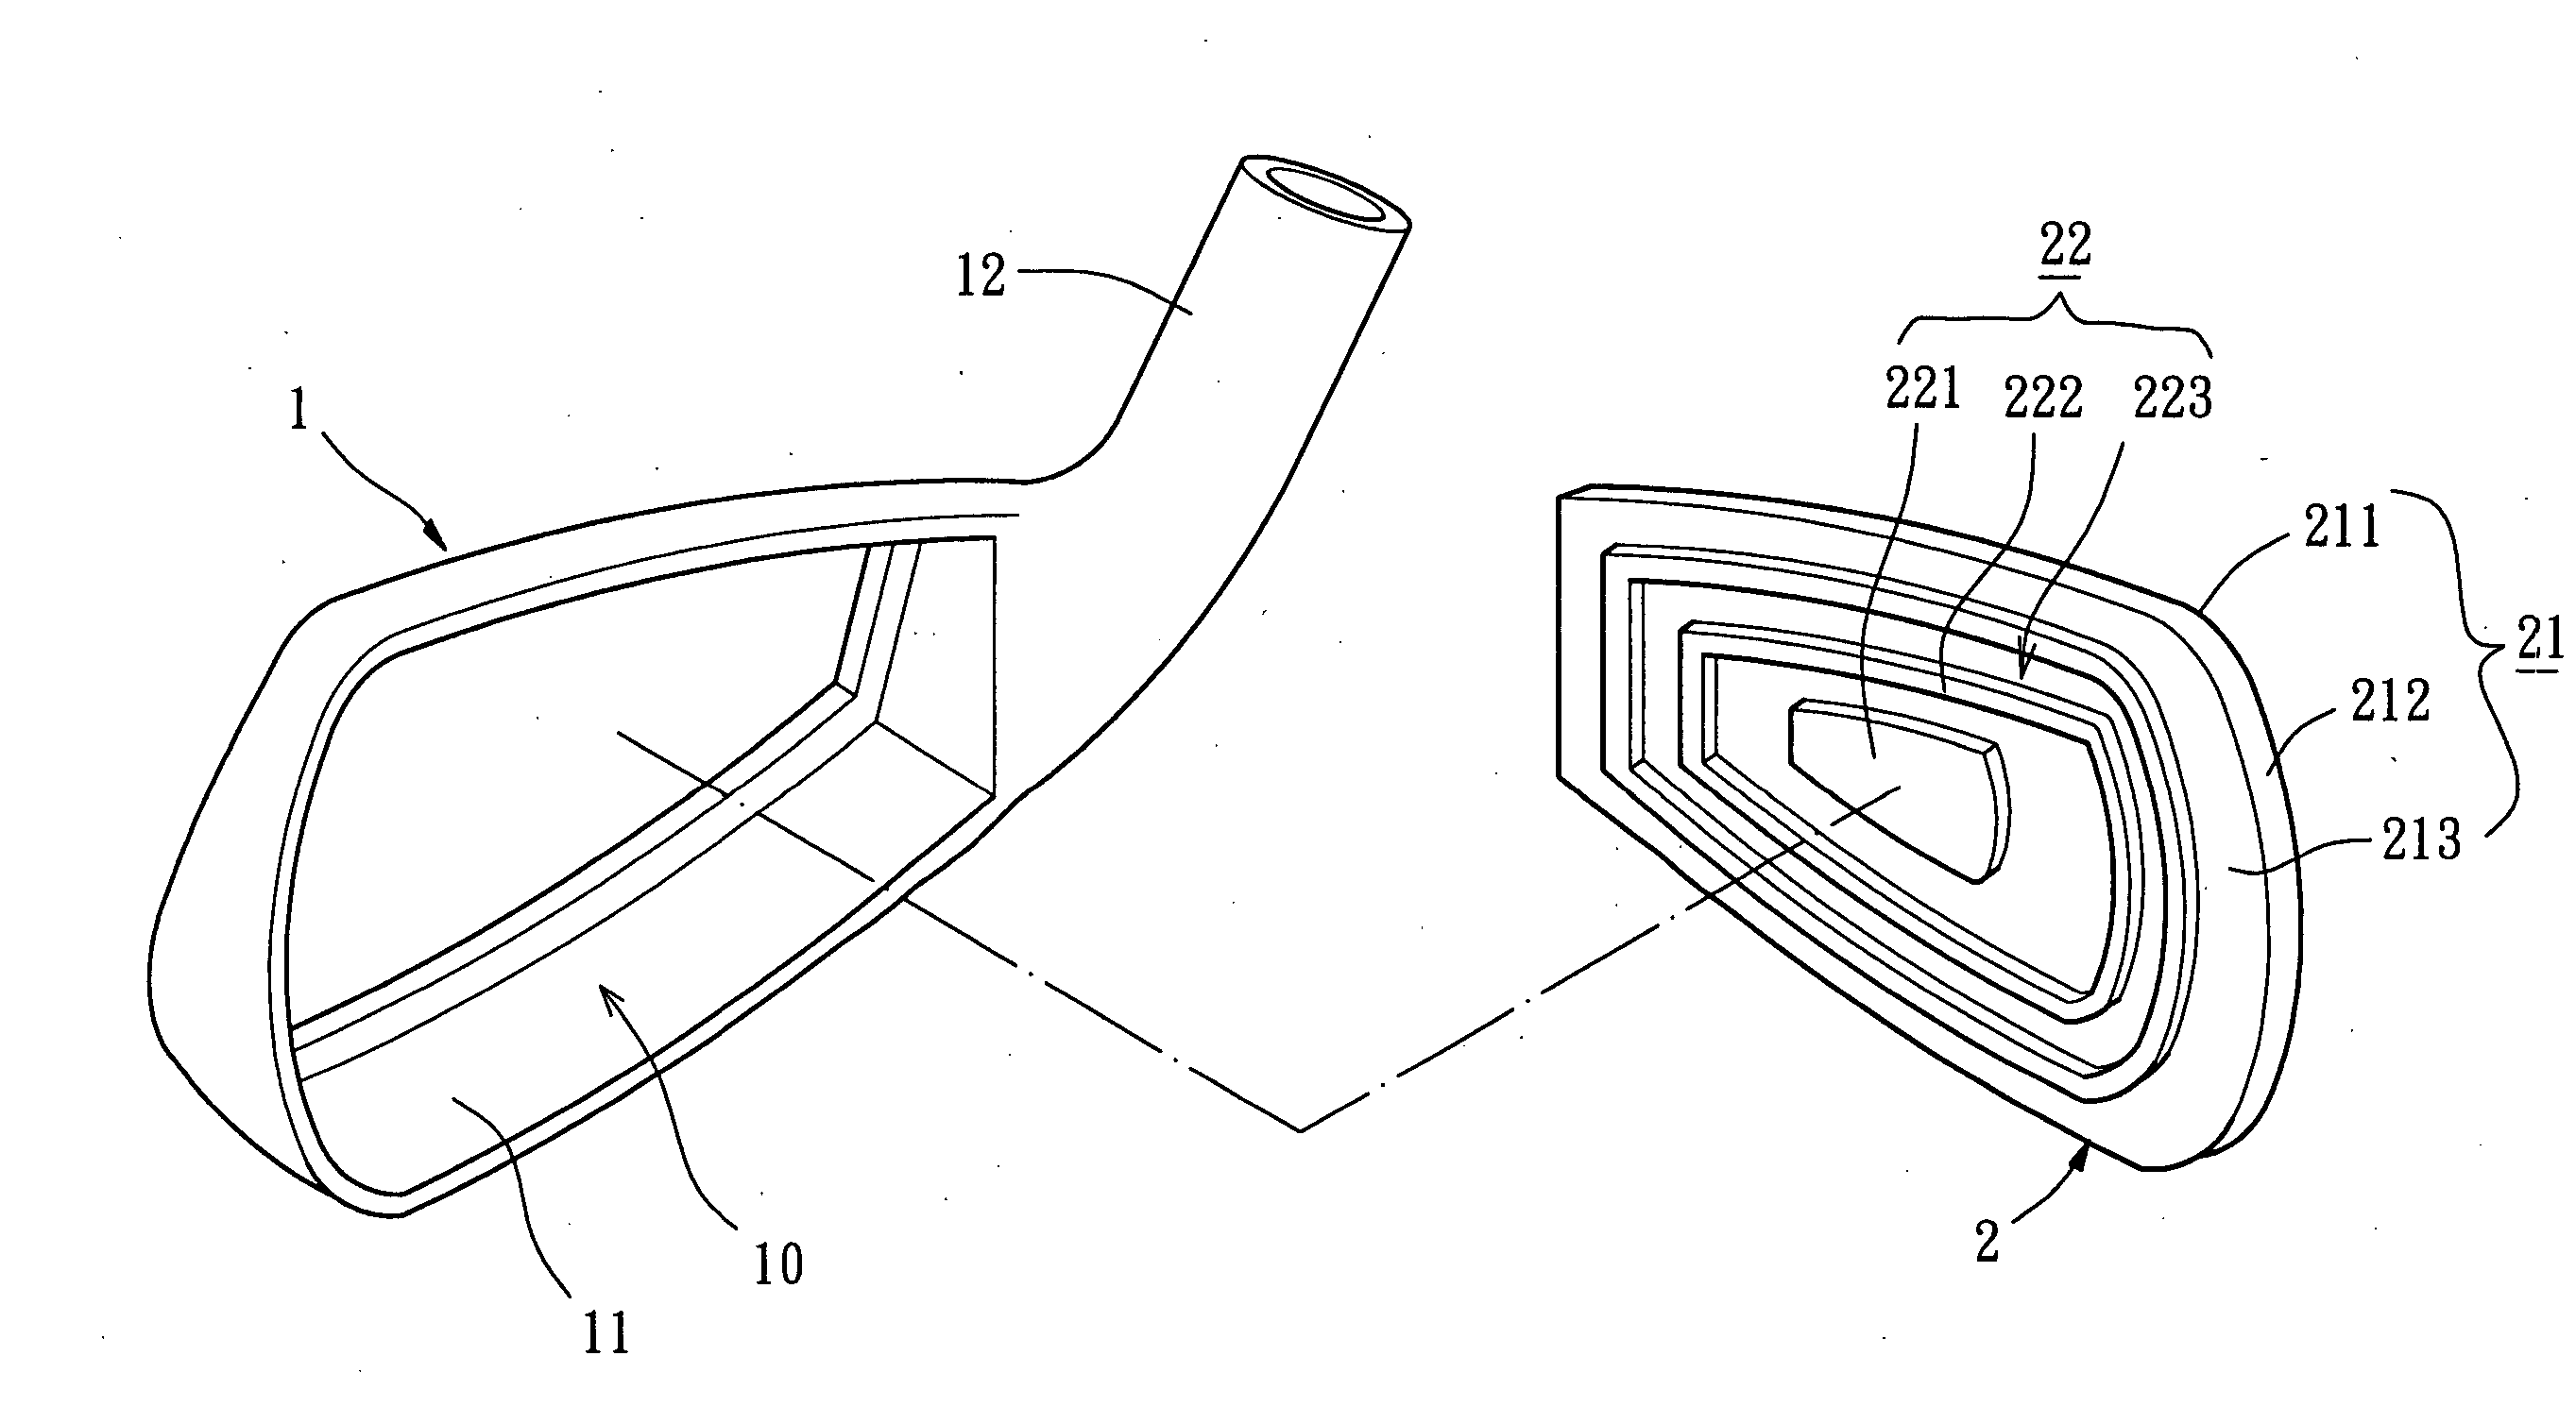 Golf club head having a complex plate formed with an upraised protrusion structure